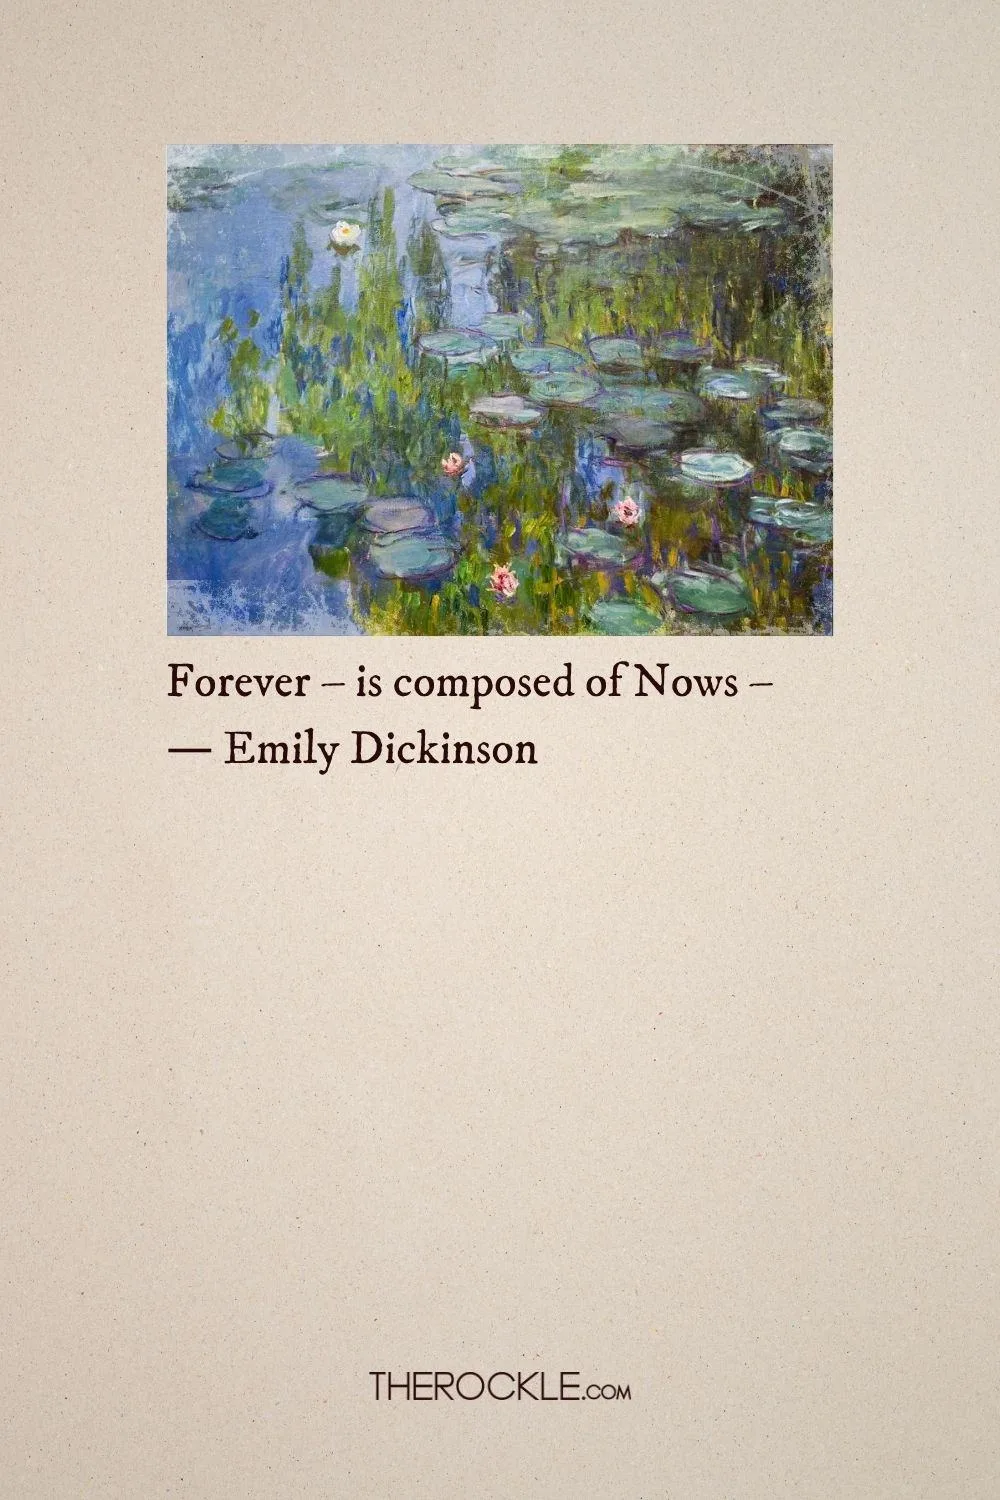 Emily Dickinson on embracing the present moment